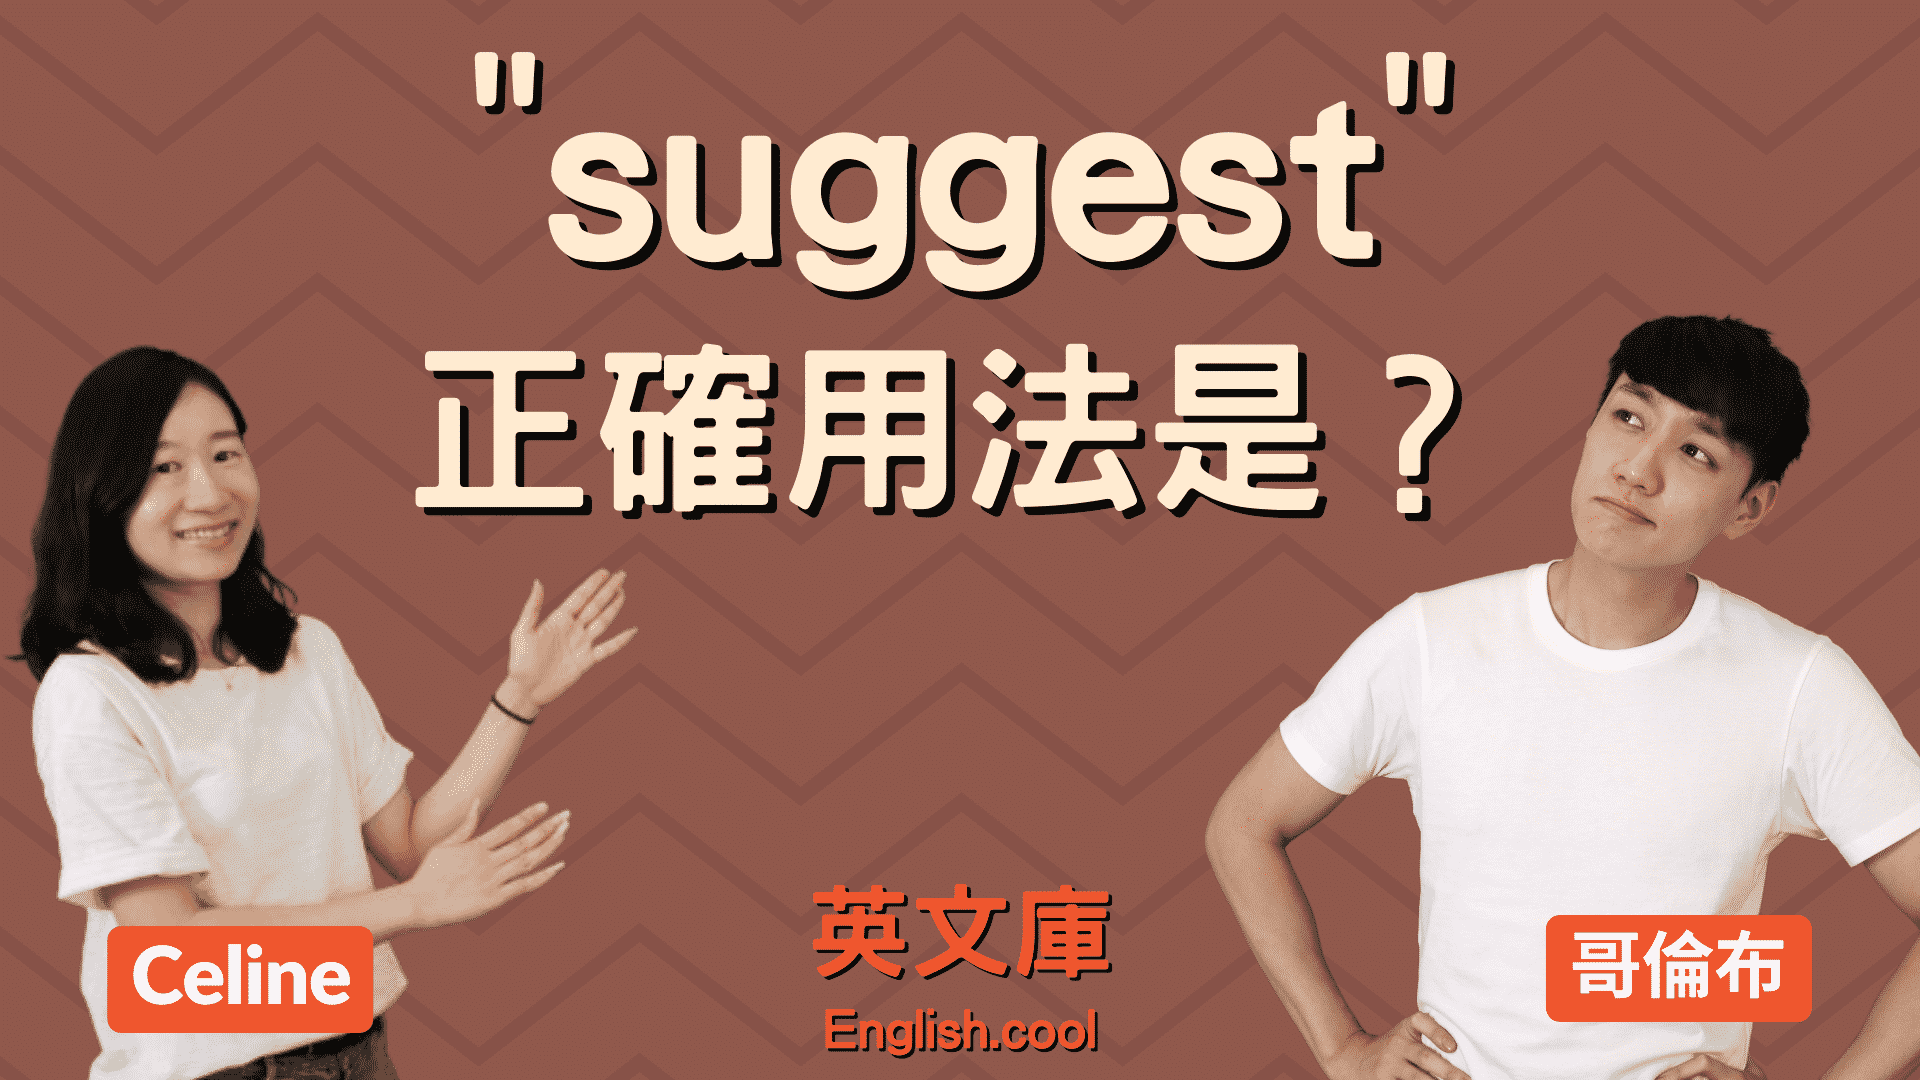 You are currently viewing 「suggest」正確用法是？「建議」你來搞懂！